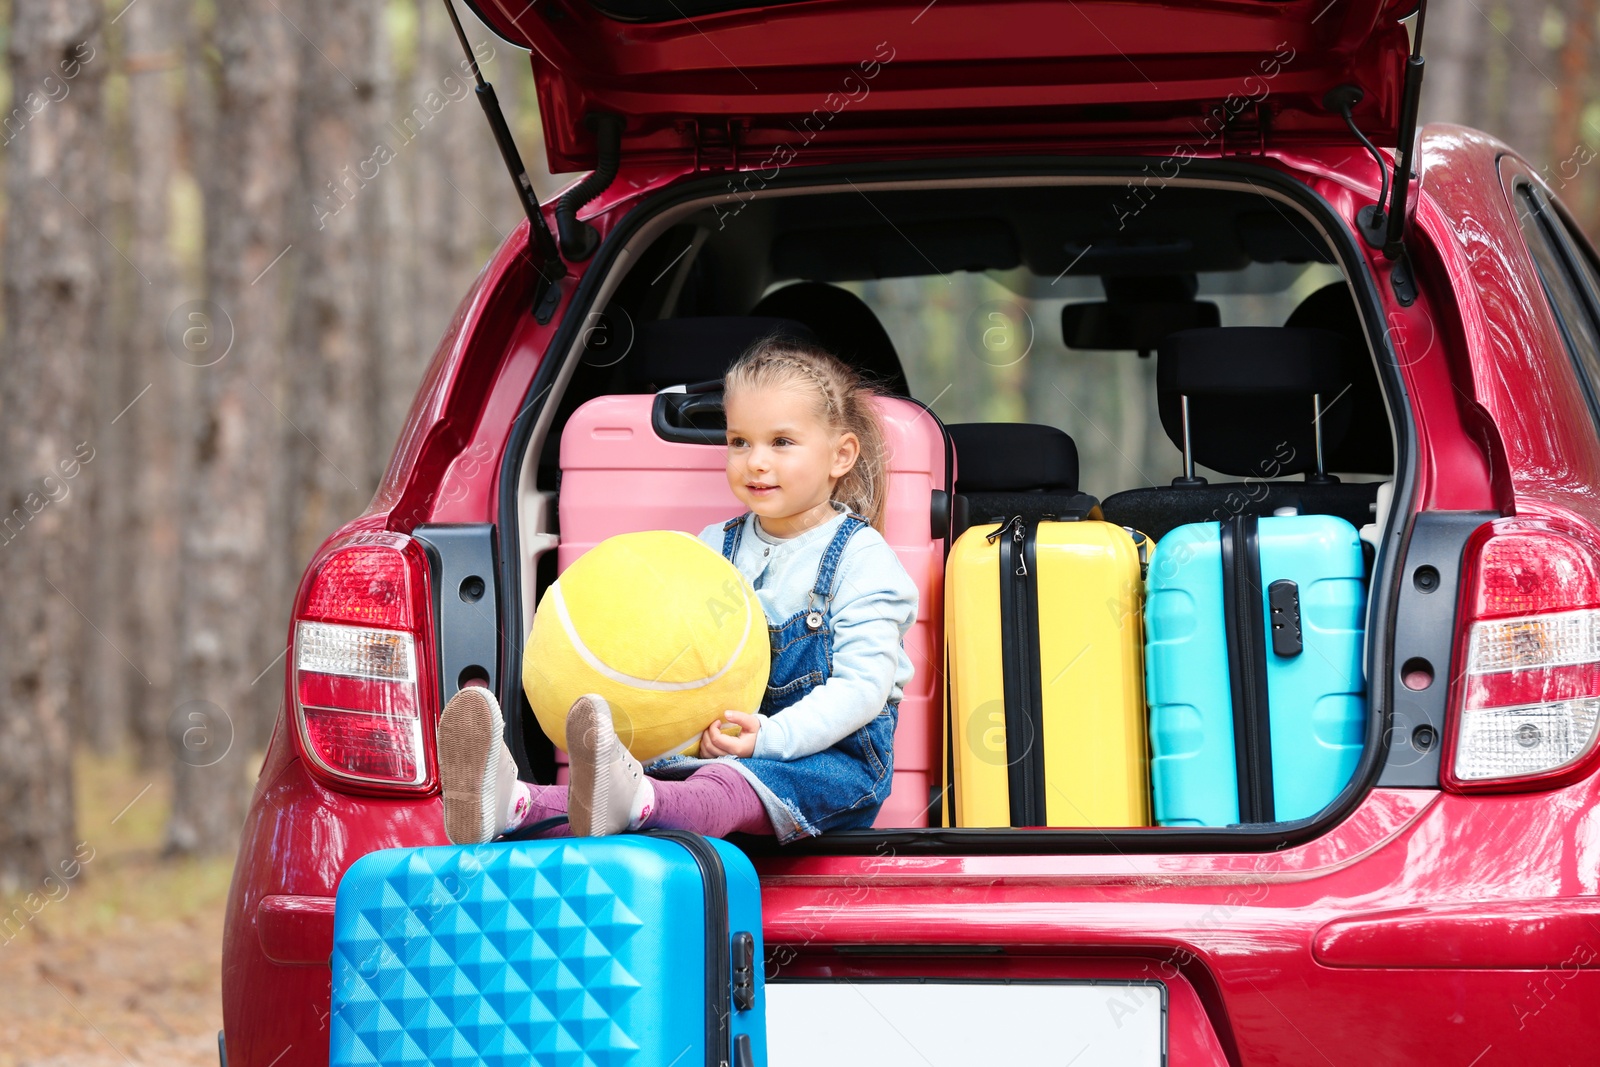 Photo of Cute little girl sitting in car trunk loaded with suitcases on forest road